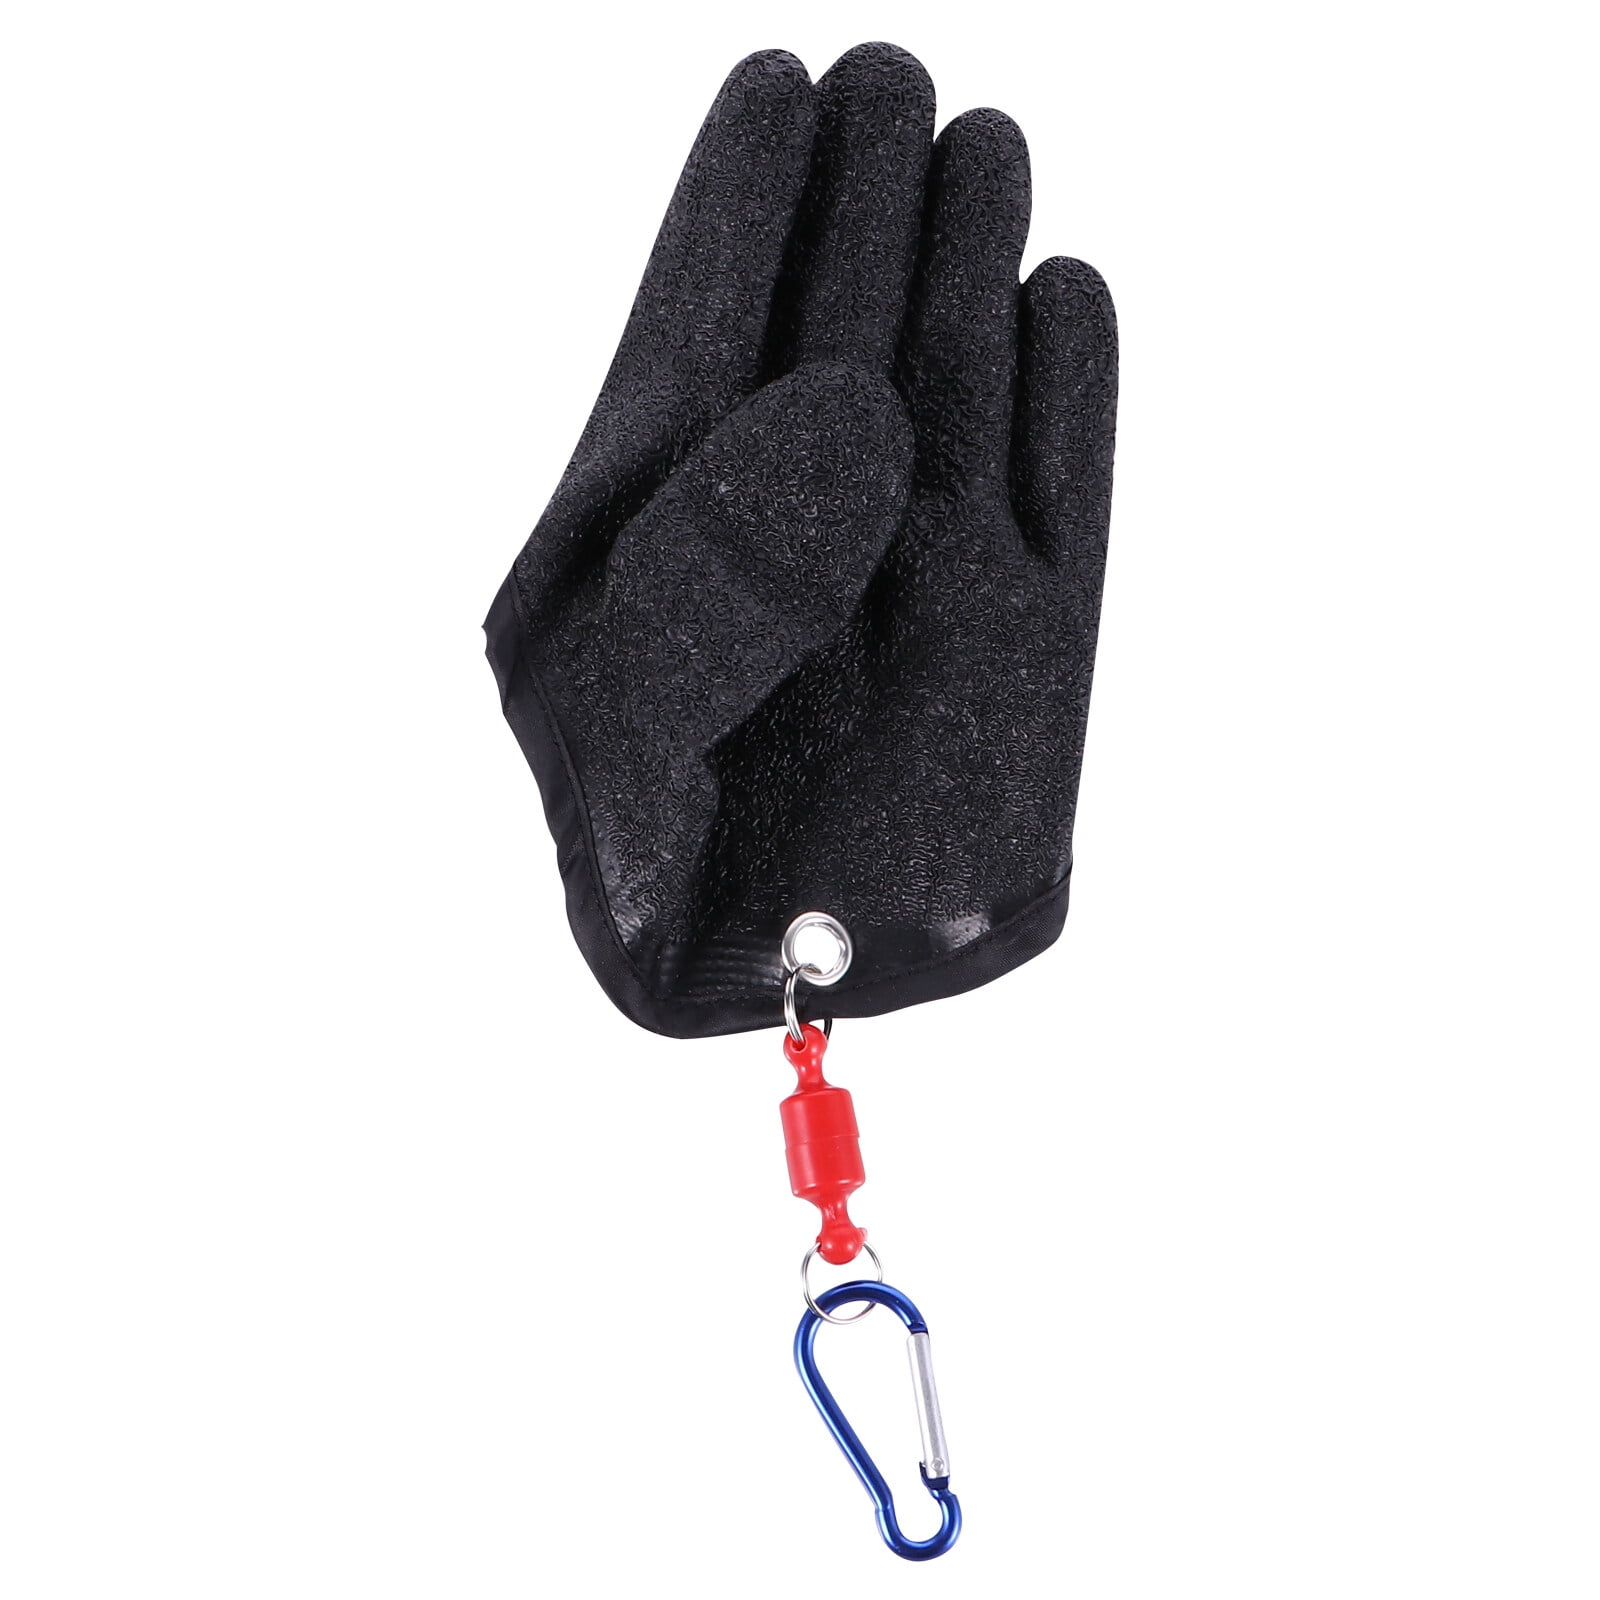 Catch Fish Gloves Skidproof Fishing Gloves Anti-Fishbone Gloves